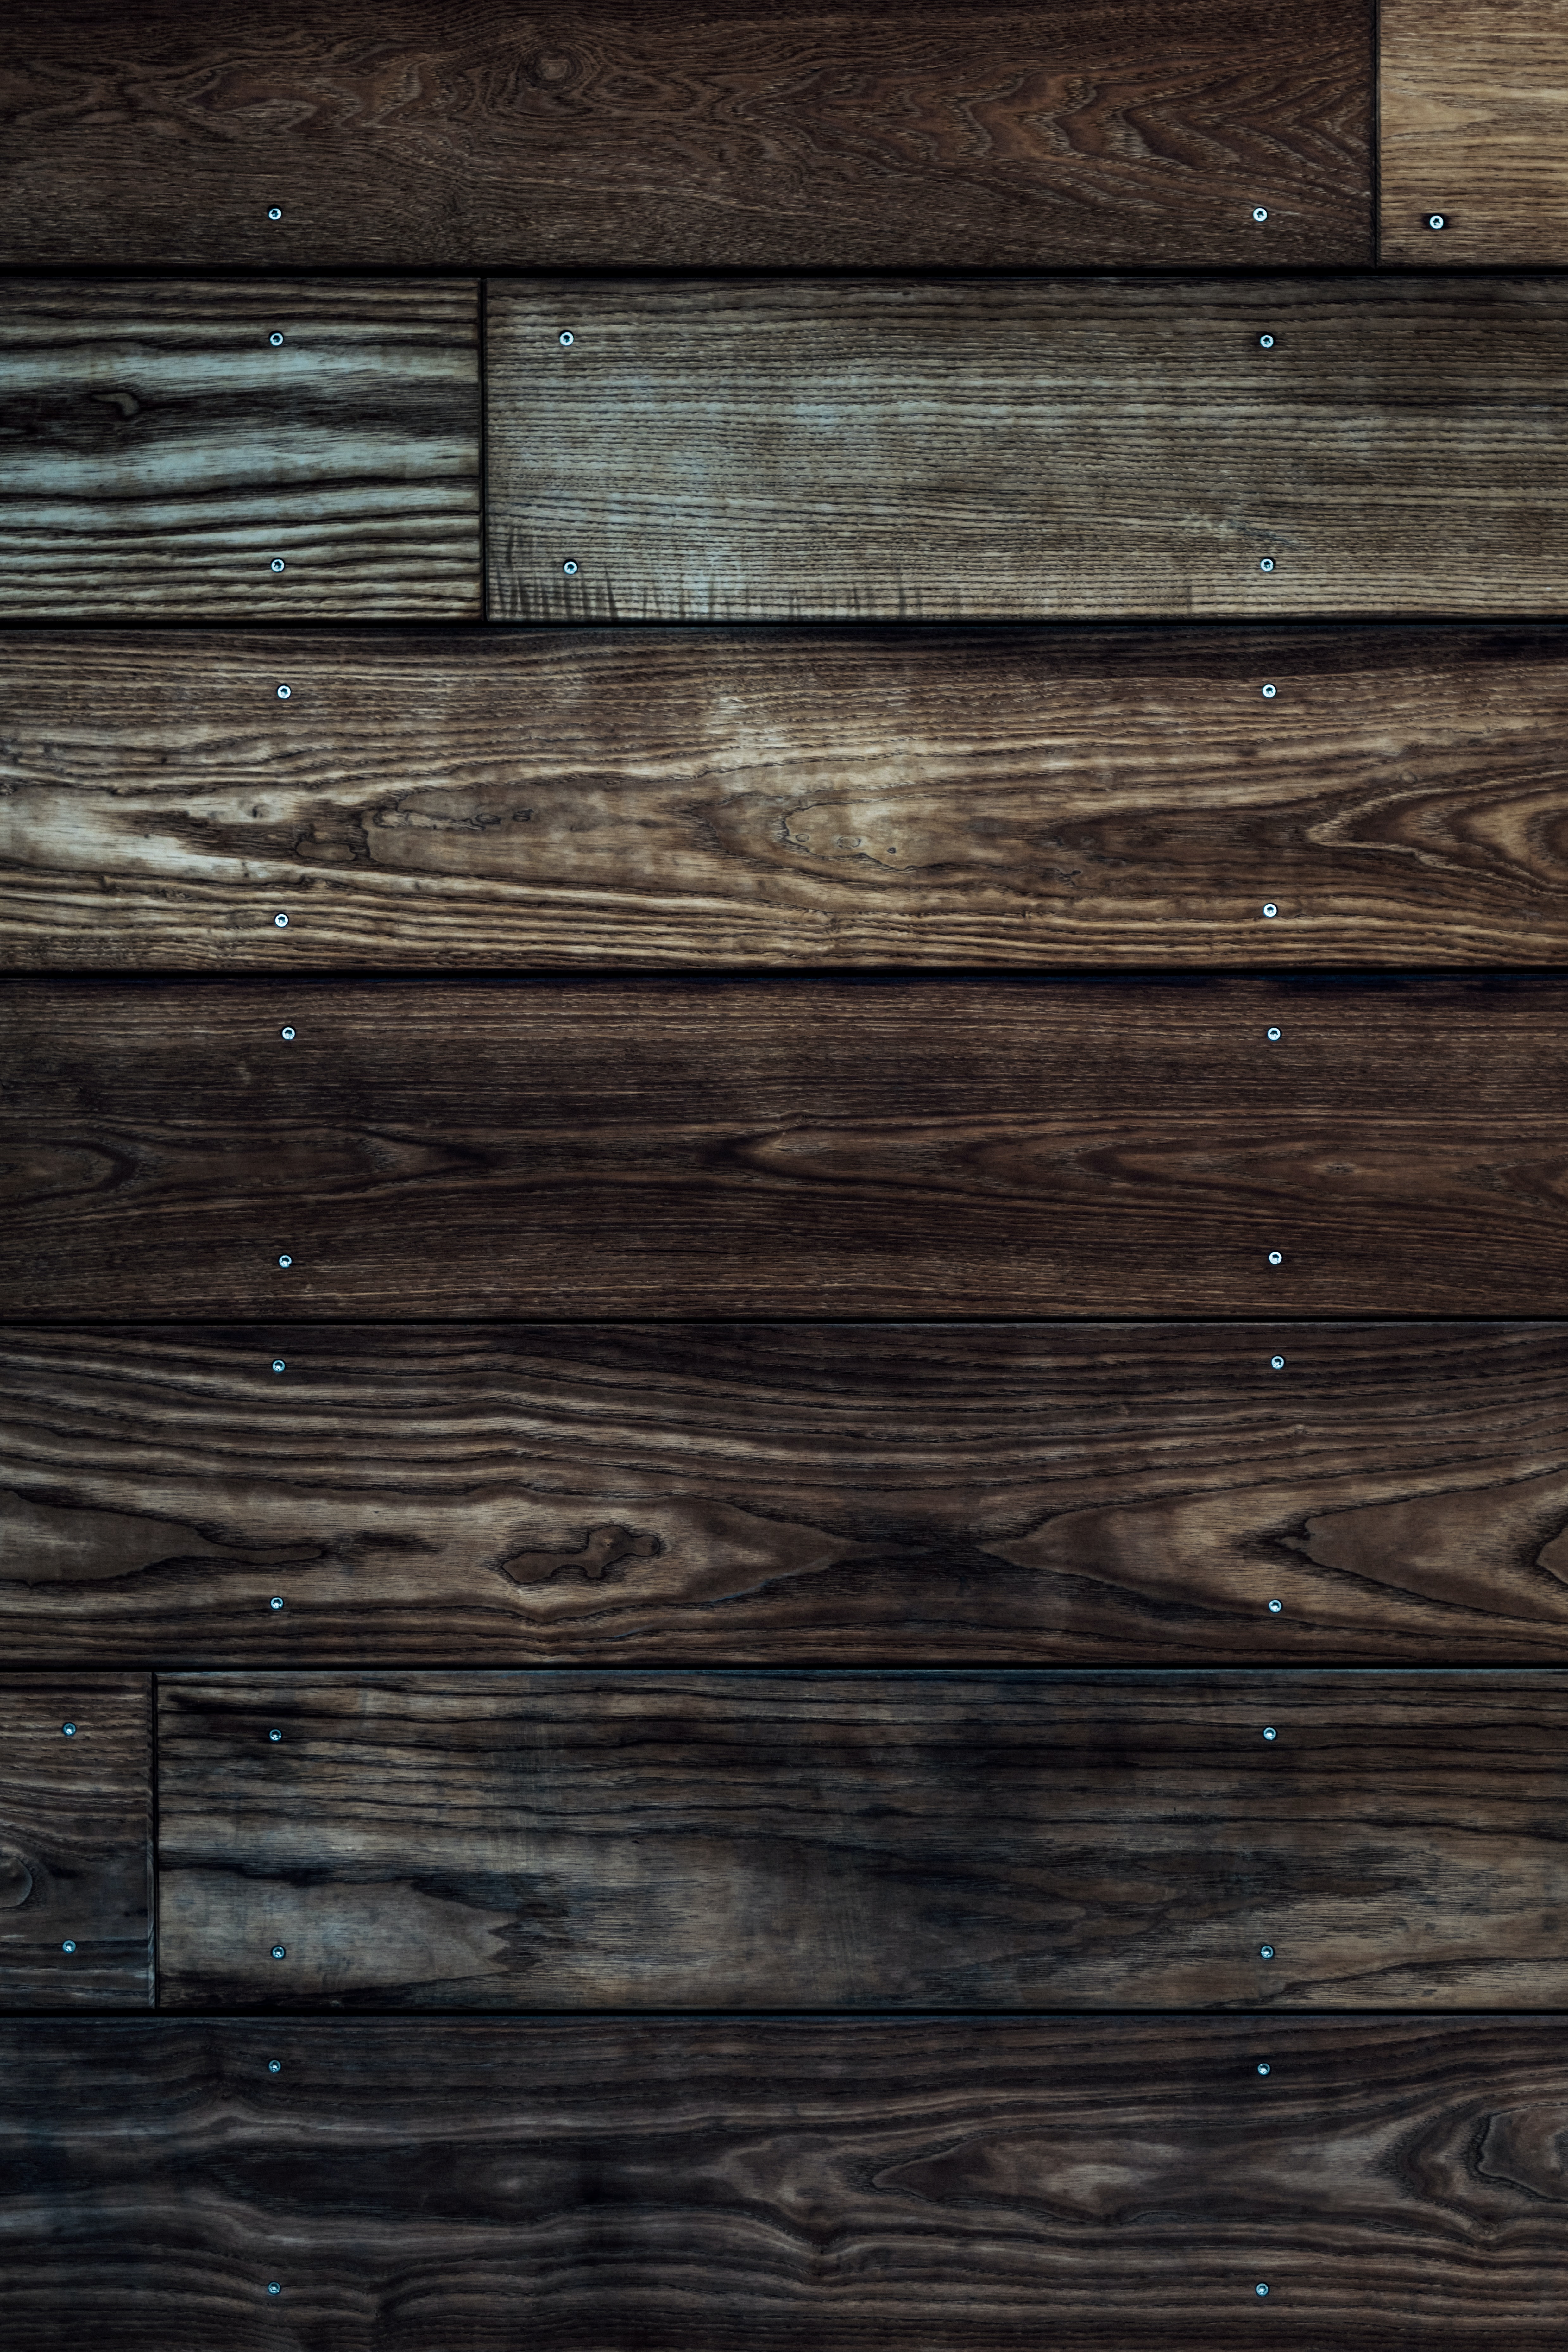 surface, wood, wooden, texture, textures, planks, board